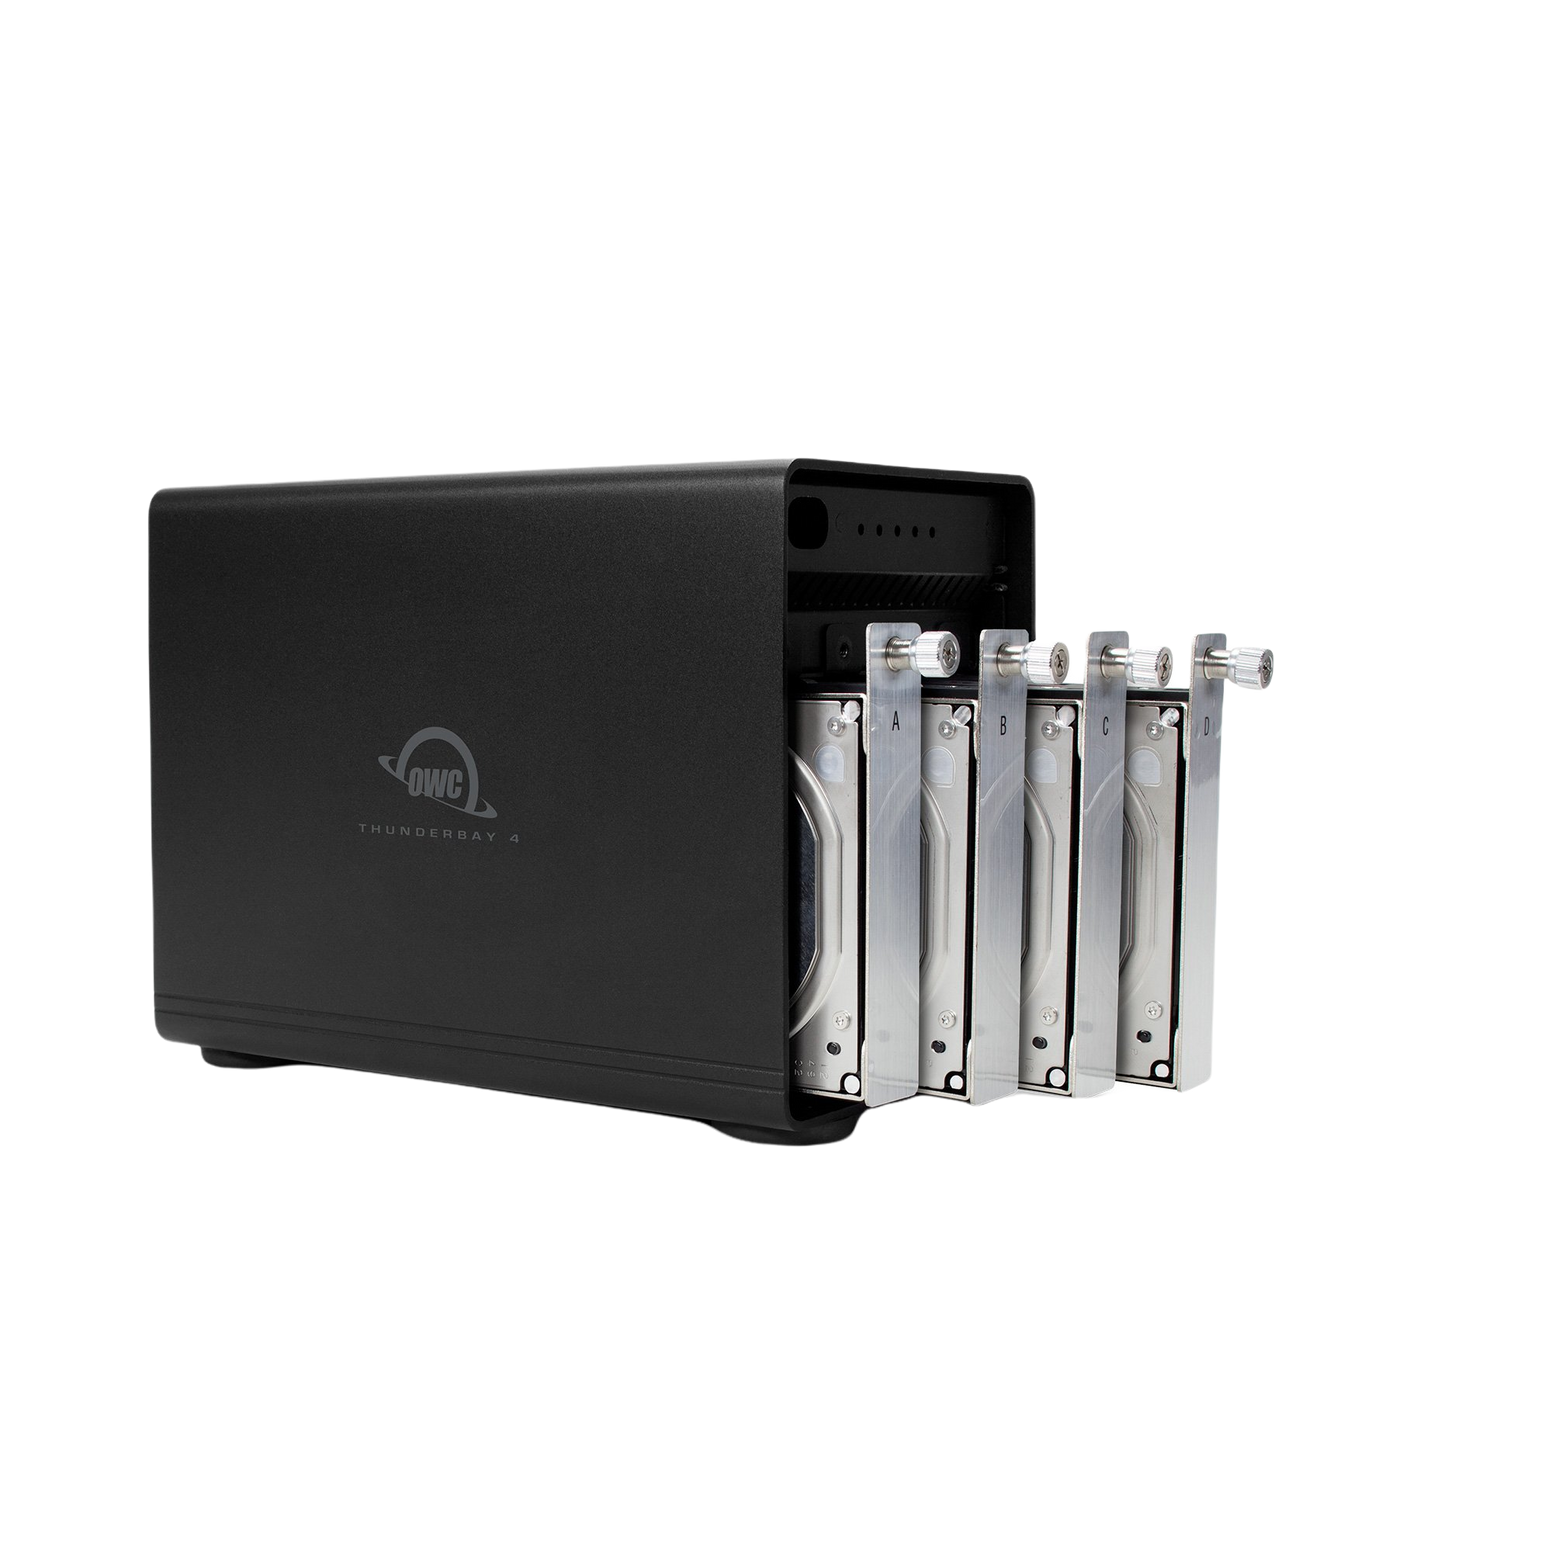 OWC 80TB ThunderBay 4 Four-Bay Thunderbolt External Storage Solution with Enterprise Drives and SoftRAID XT